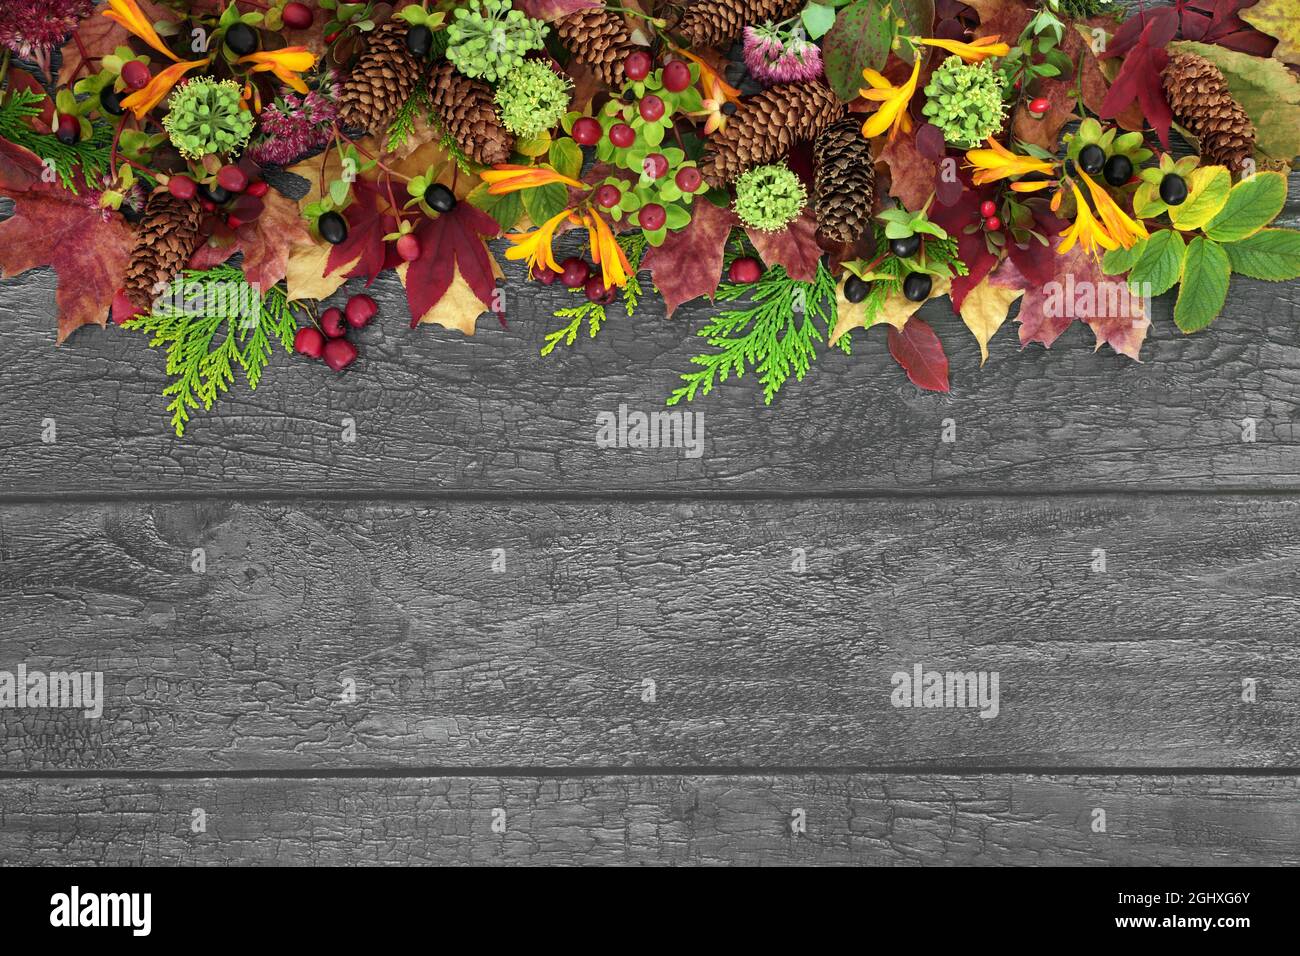 Natural Autumn nature background border with leaves, flowers, pine cones and berry fruit on rustic silver grey wood. Harvest festival concept. Stock Photo